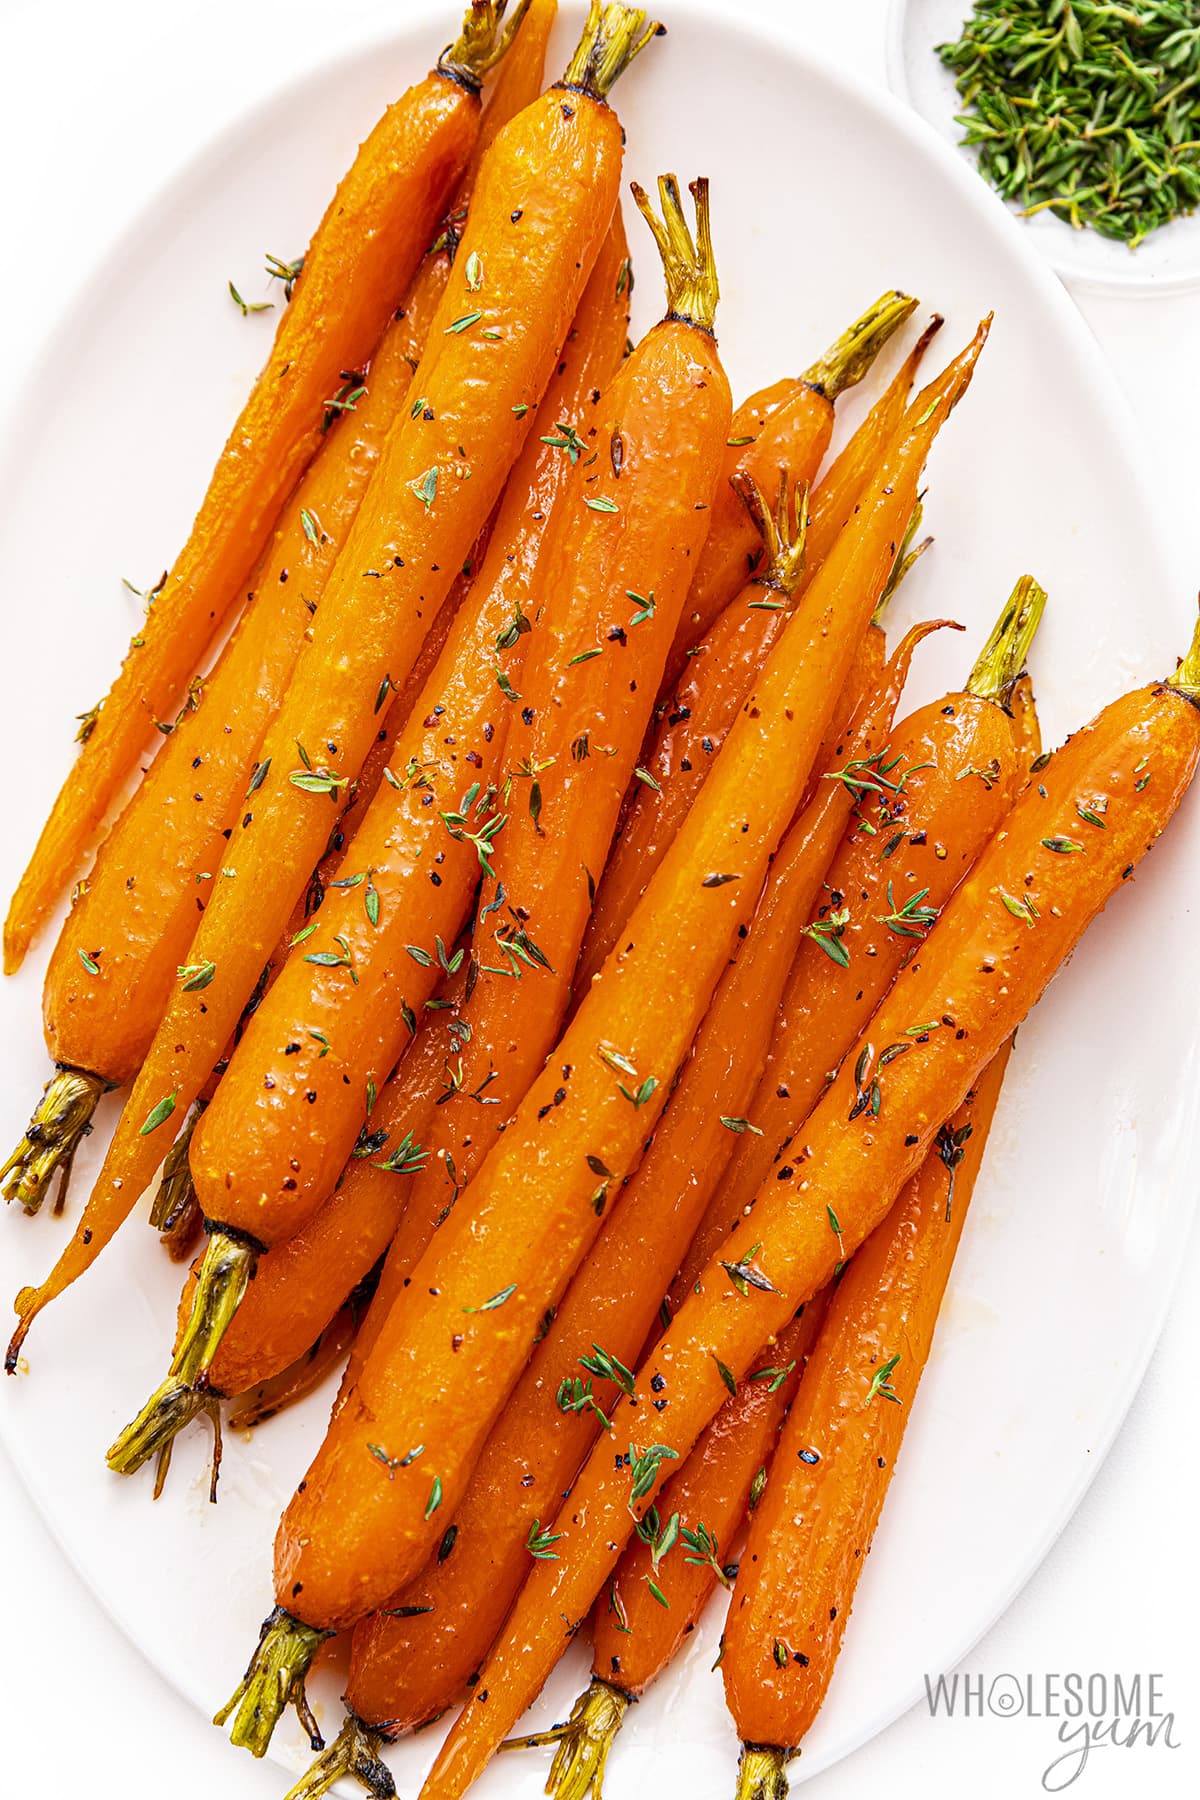 Oven roasted carrots on a serving platter.